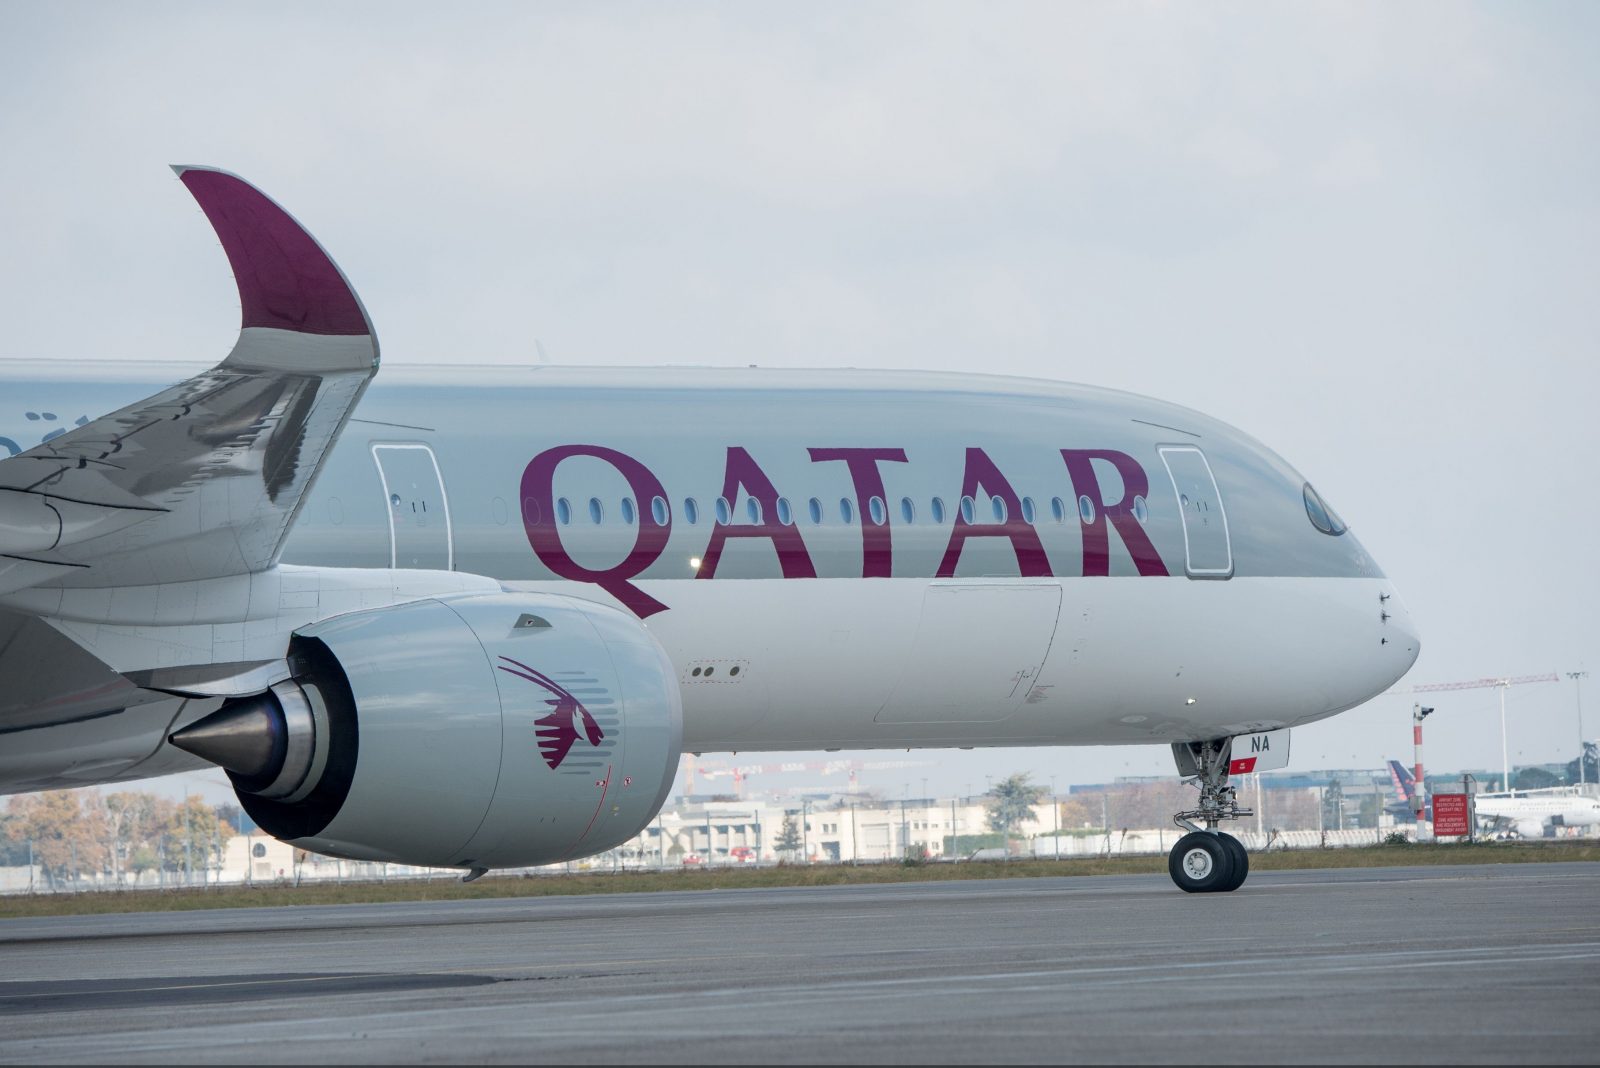 Finnish Police Arrest Two Members of Qatars Airways Cabin Crew for Being Drunk